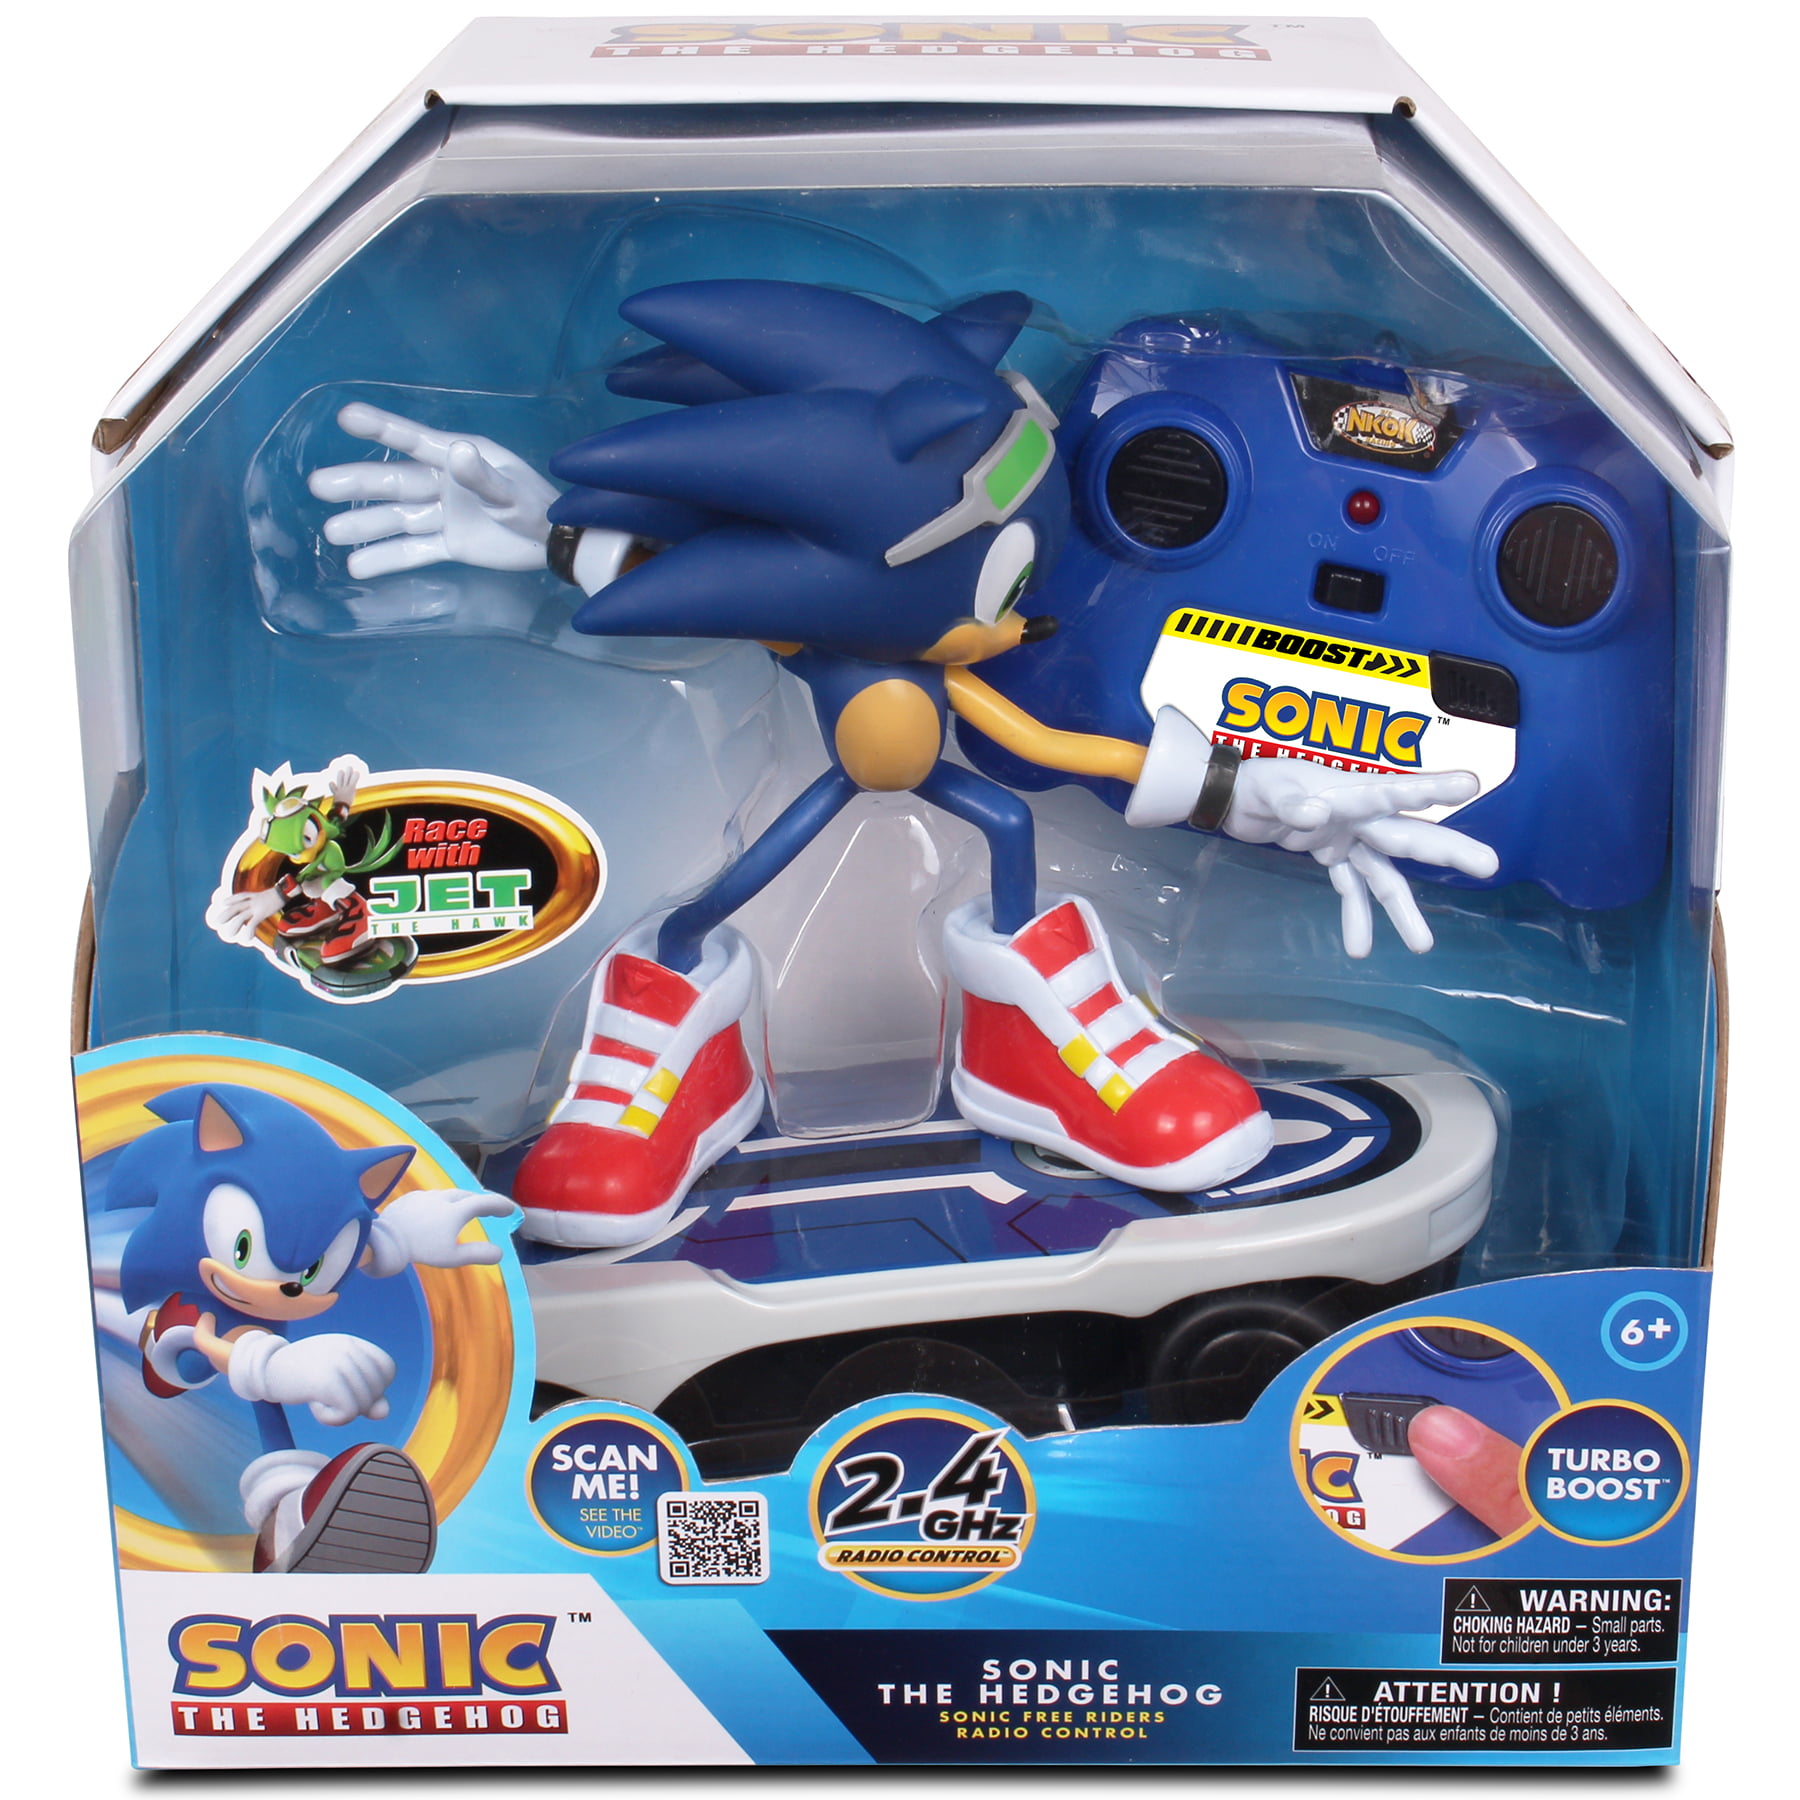 NKOK Soinc Riders Sonic The Hedehog RC Radio Control for sale online 